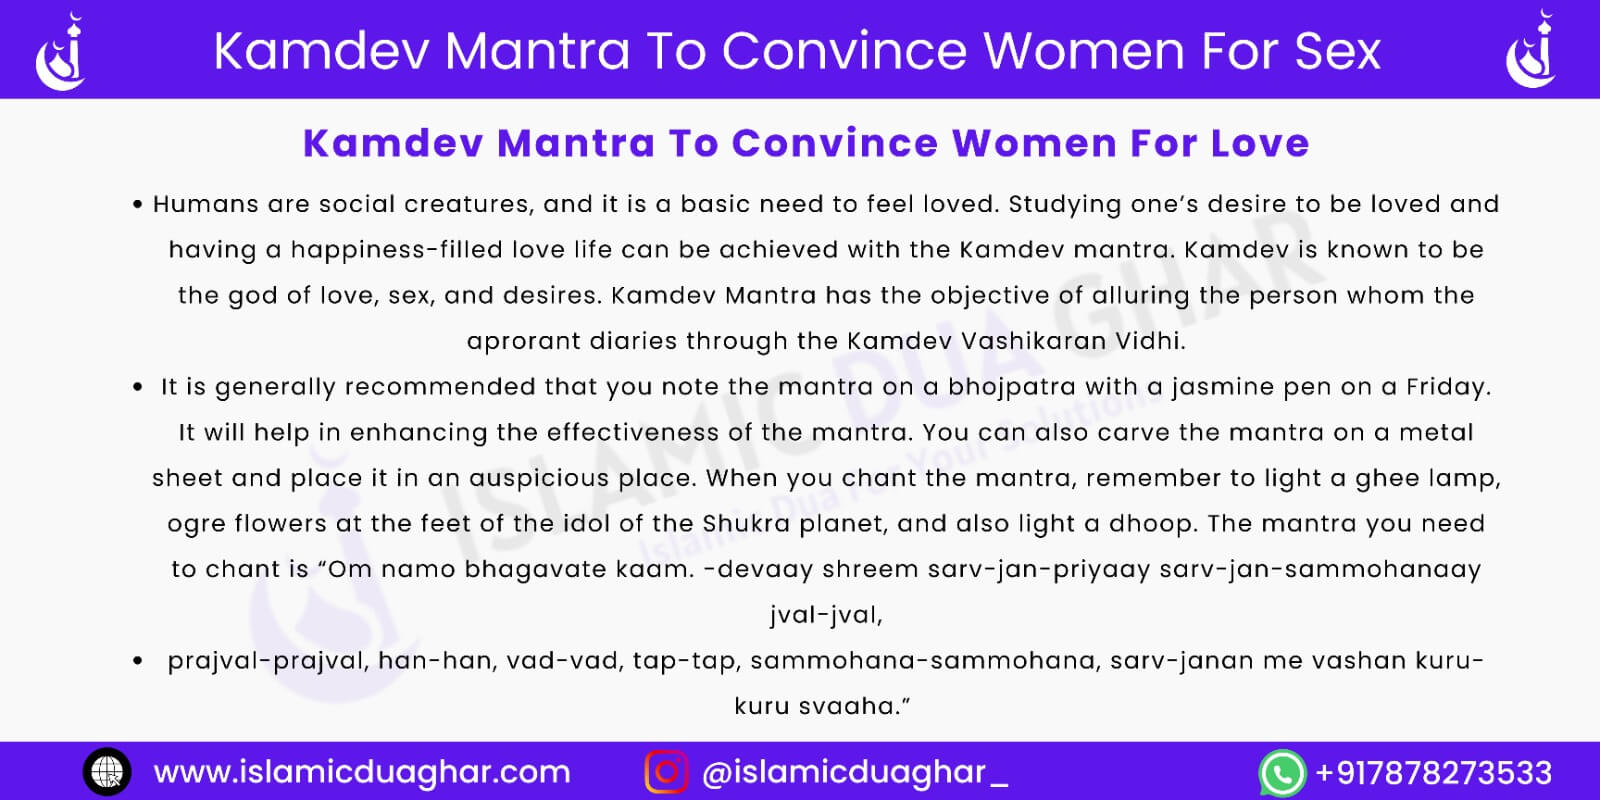 Kamdev Mantra To Convince Women For Sex